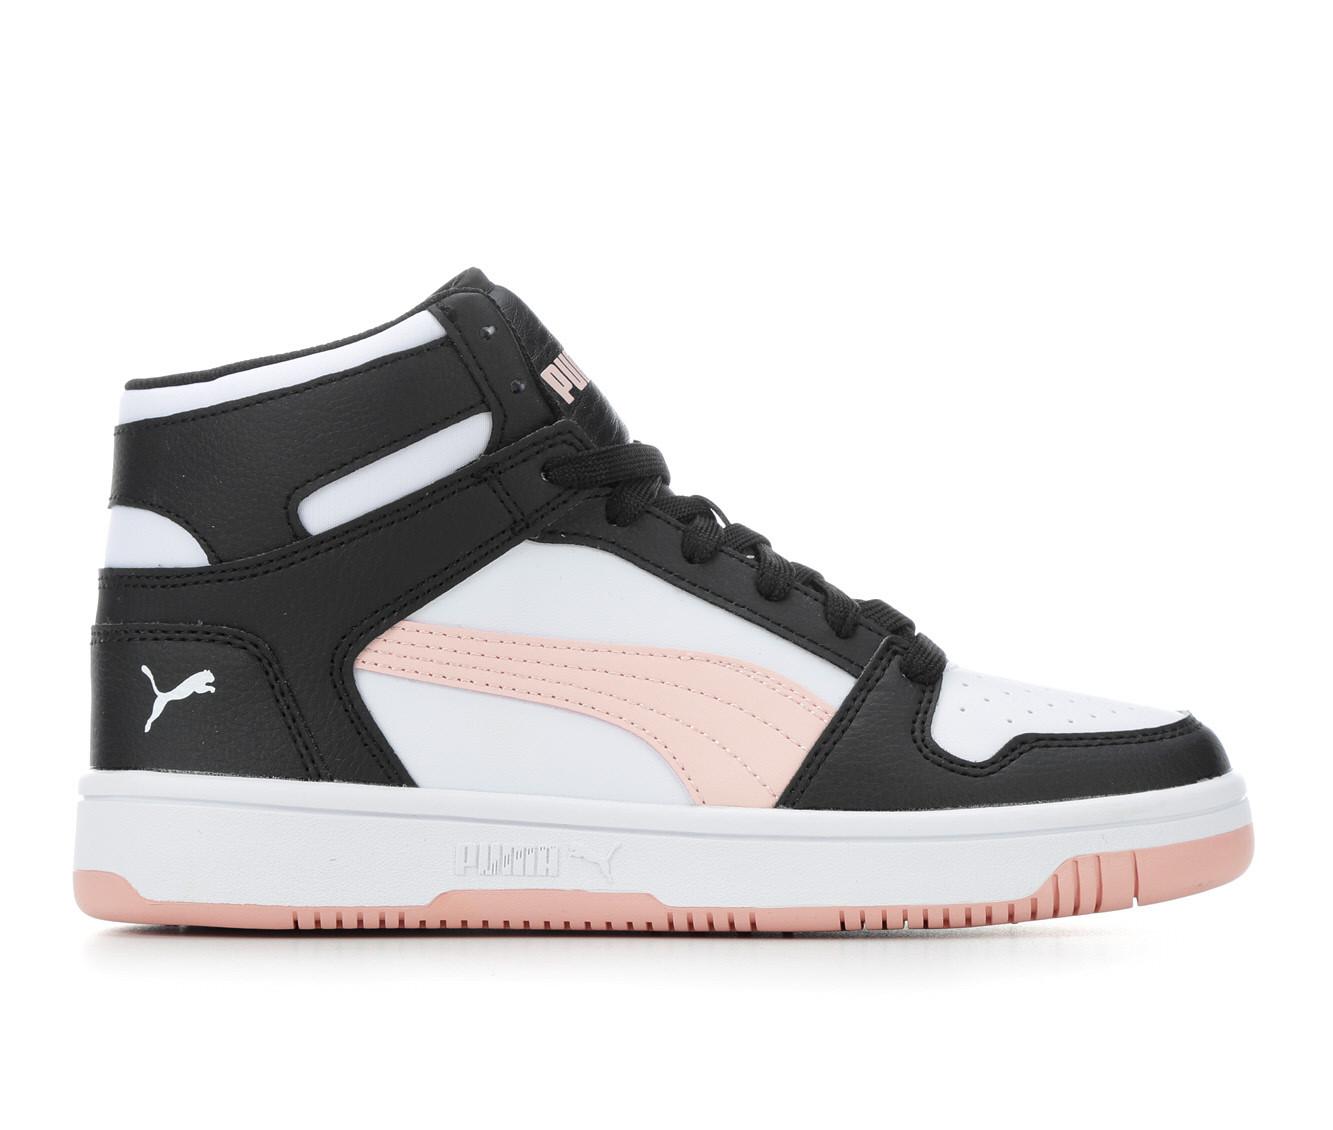 High-Top Sneakers for Women